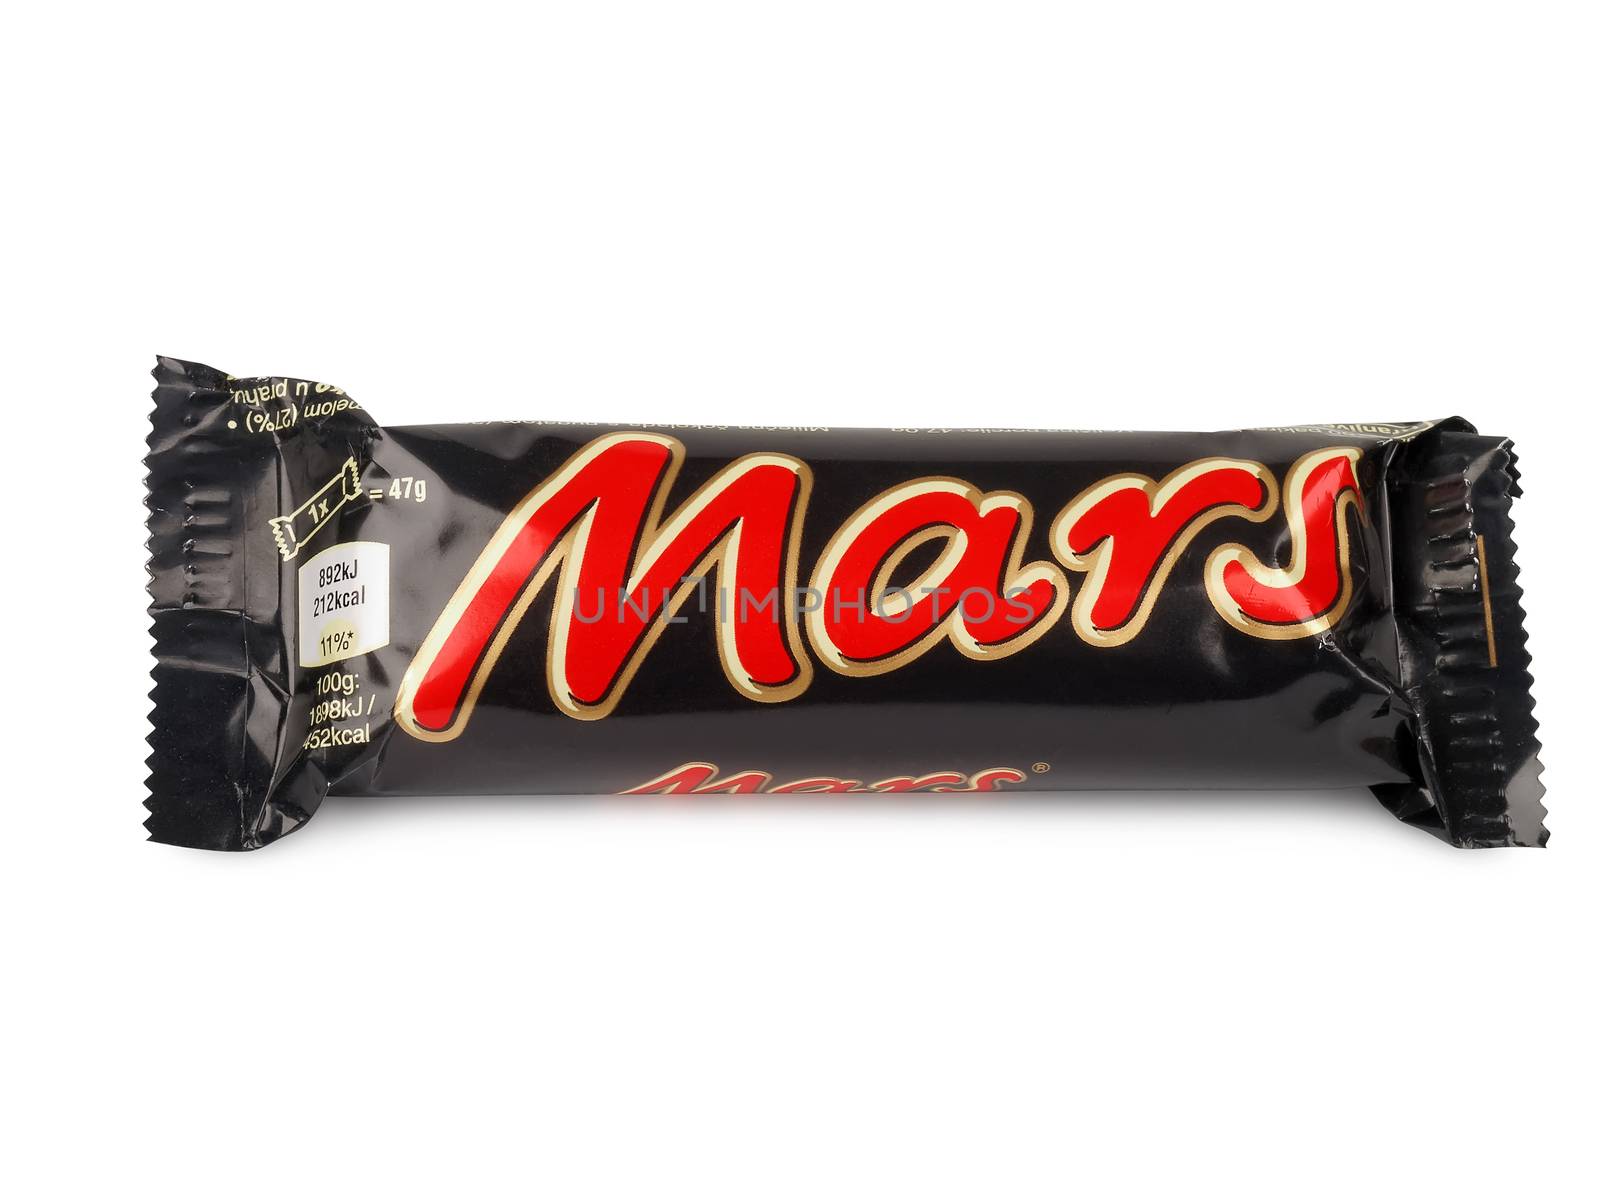 PULA, CROATIA - MARCH 13, 2016: Mars chocolate bar isolated on white background. Mars bars are produced by Mars Incorporated. The first Mars bar was produced in England in 1932